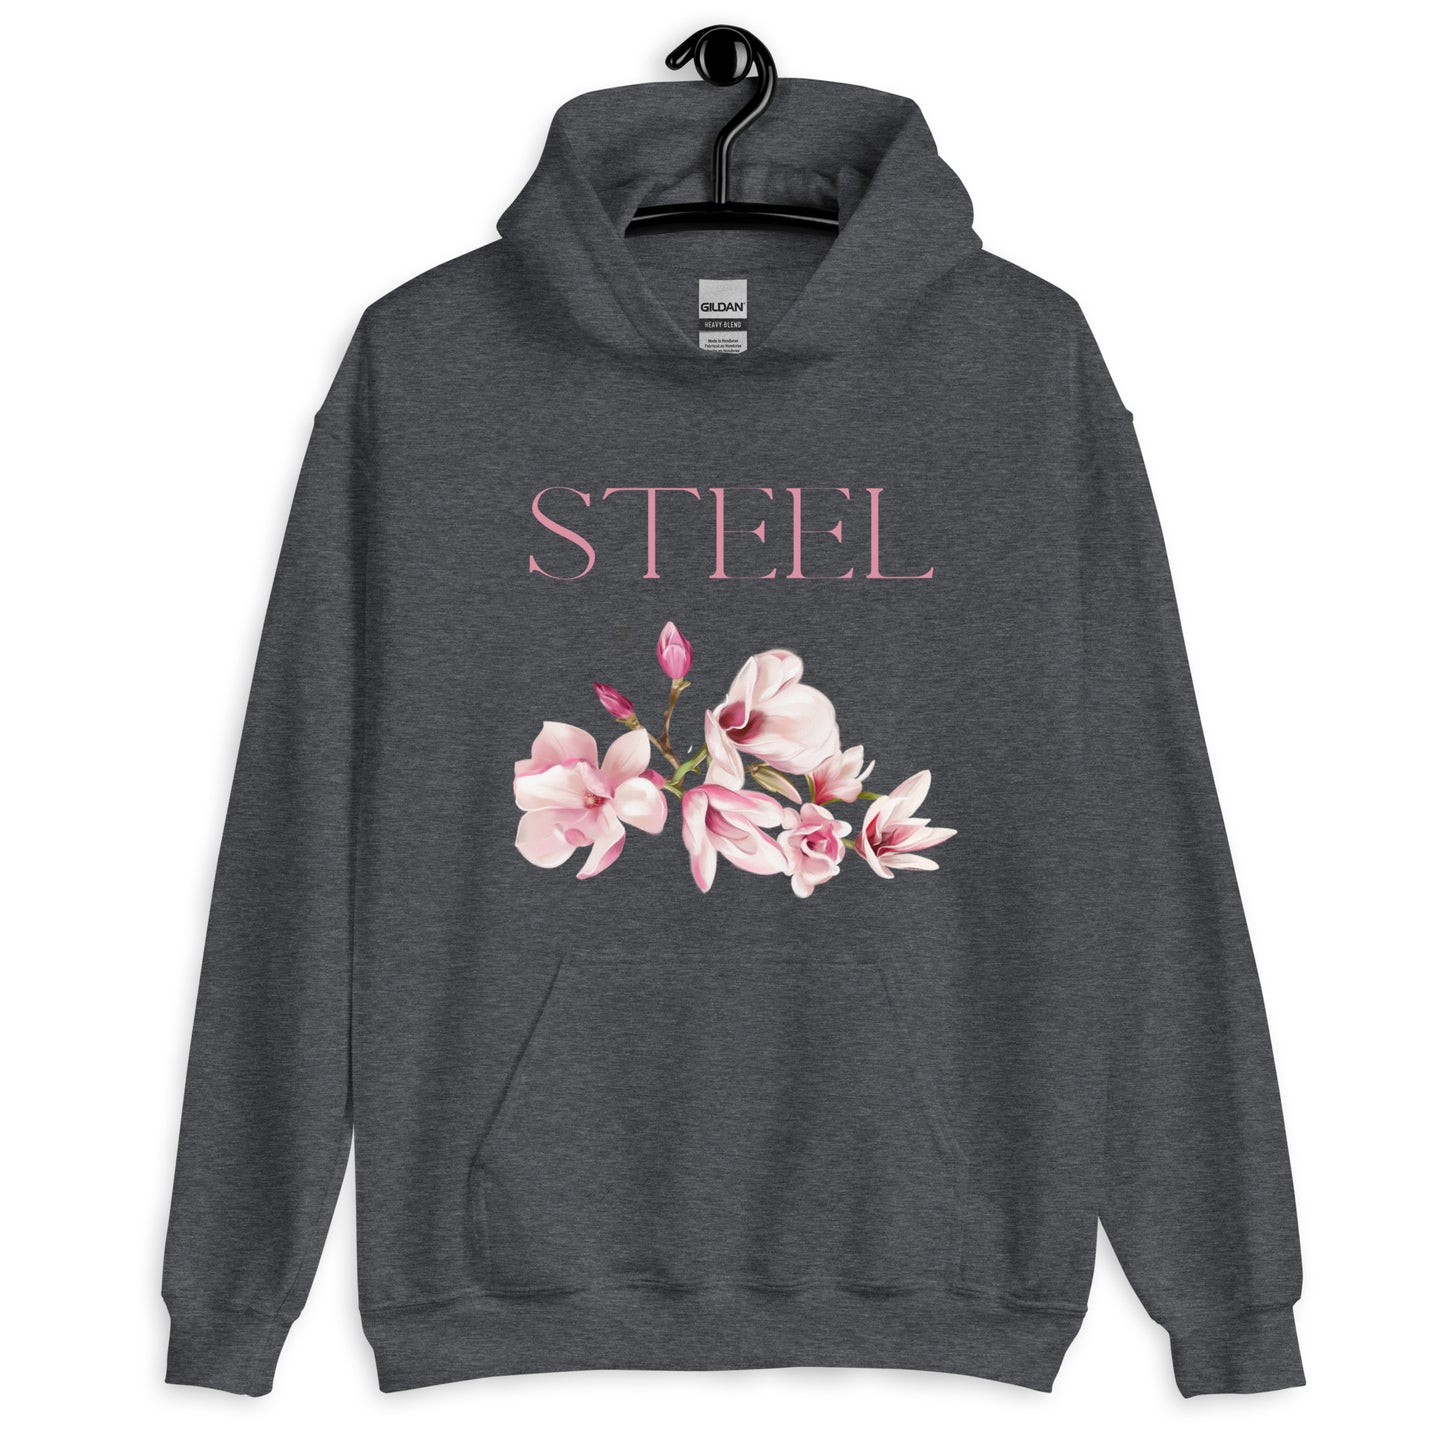 Steel Magnolias Unisex Hoodie, Vibrant Magnolias for Movie Lovers, Life Goes On Message, Gift for Mothers and Daughters